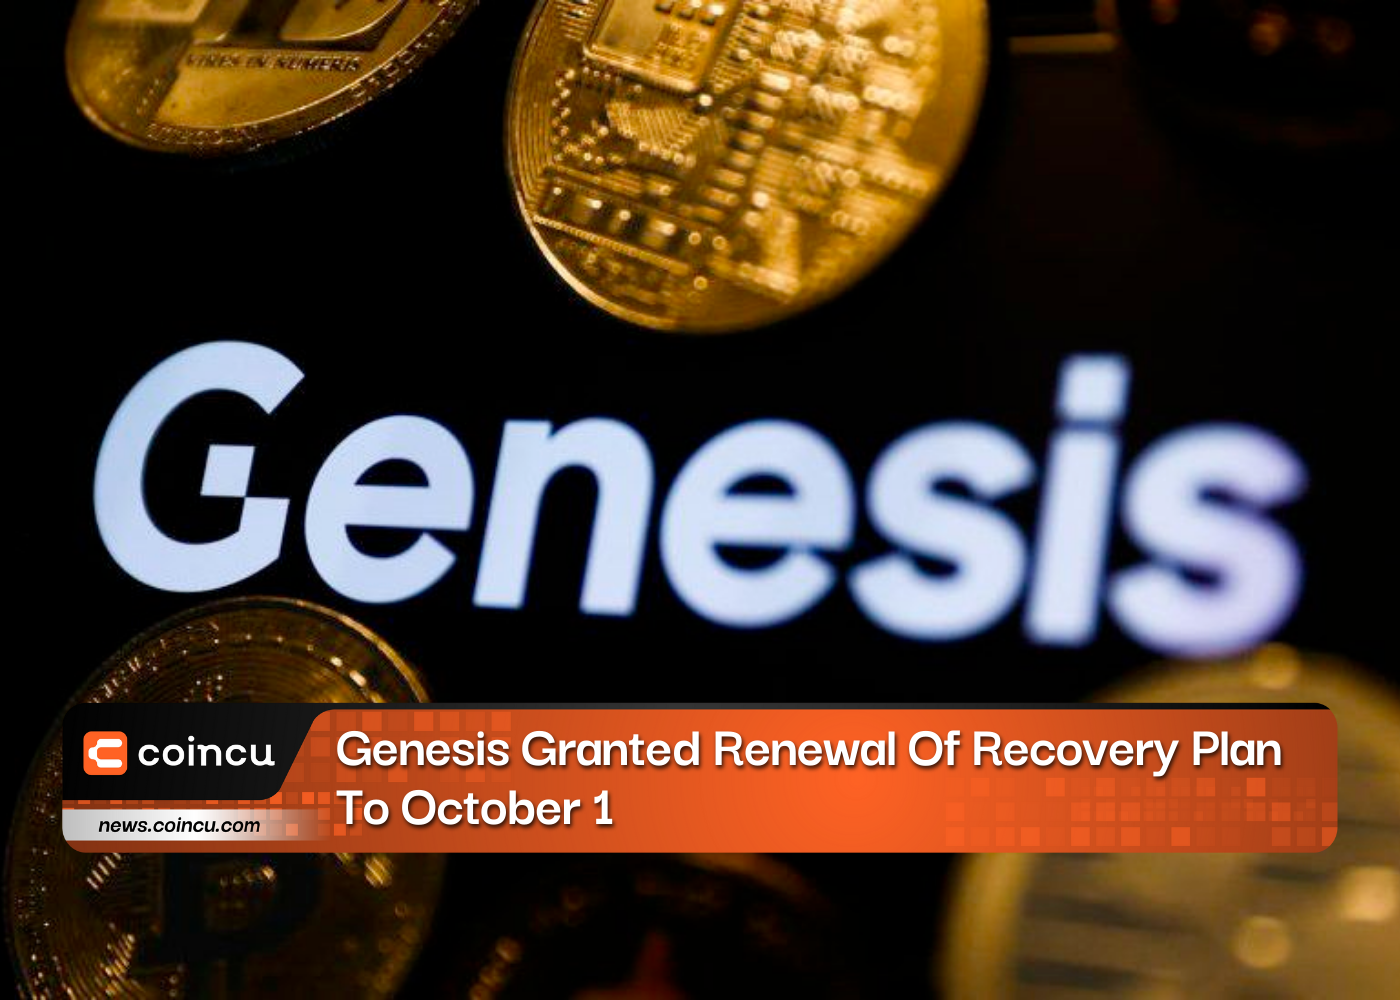 Genesis Granted Renewal Of Recovery Plan To October 1